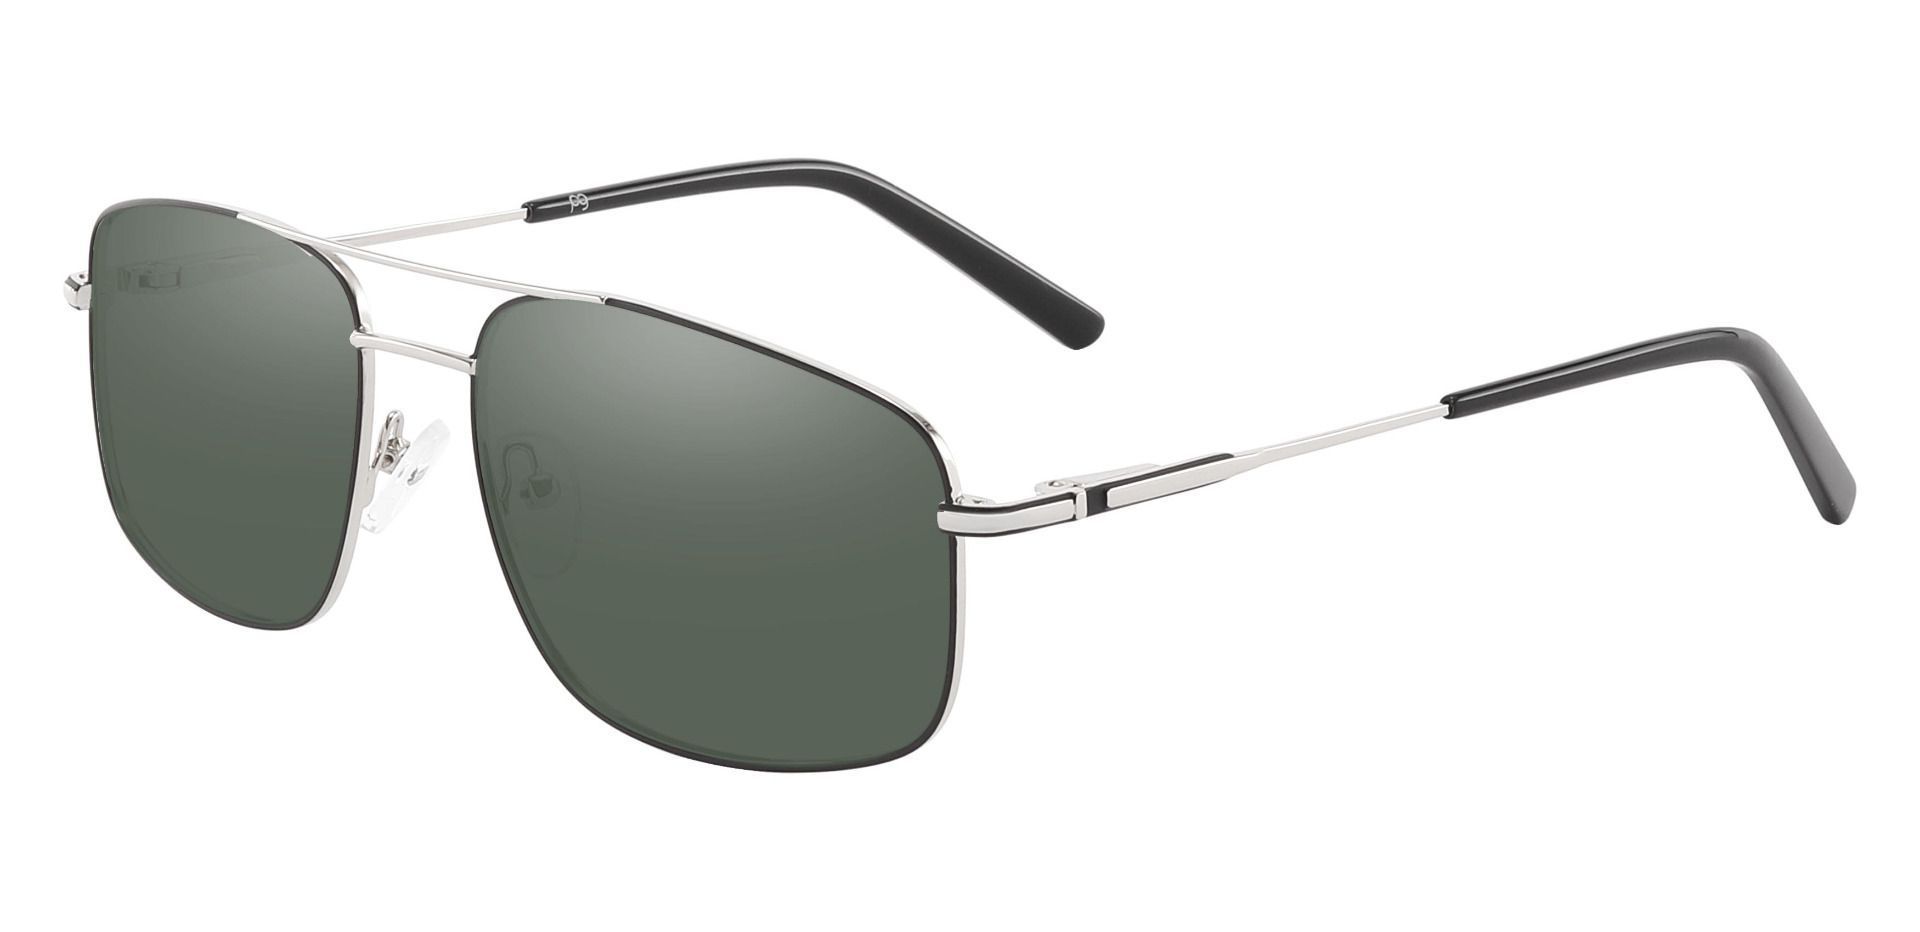 Turner Aviator Non-Rx Sunglasses - Silver Frame With Green Lenses